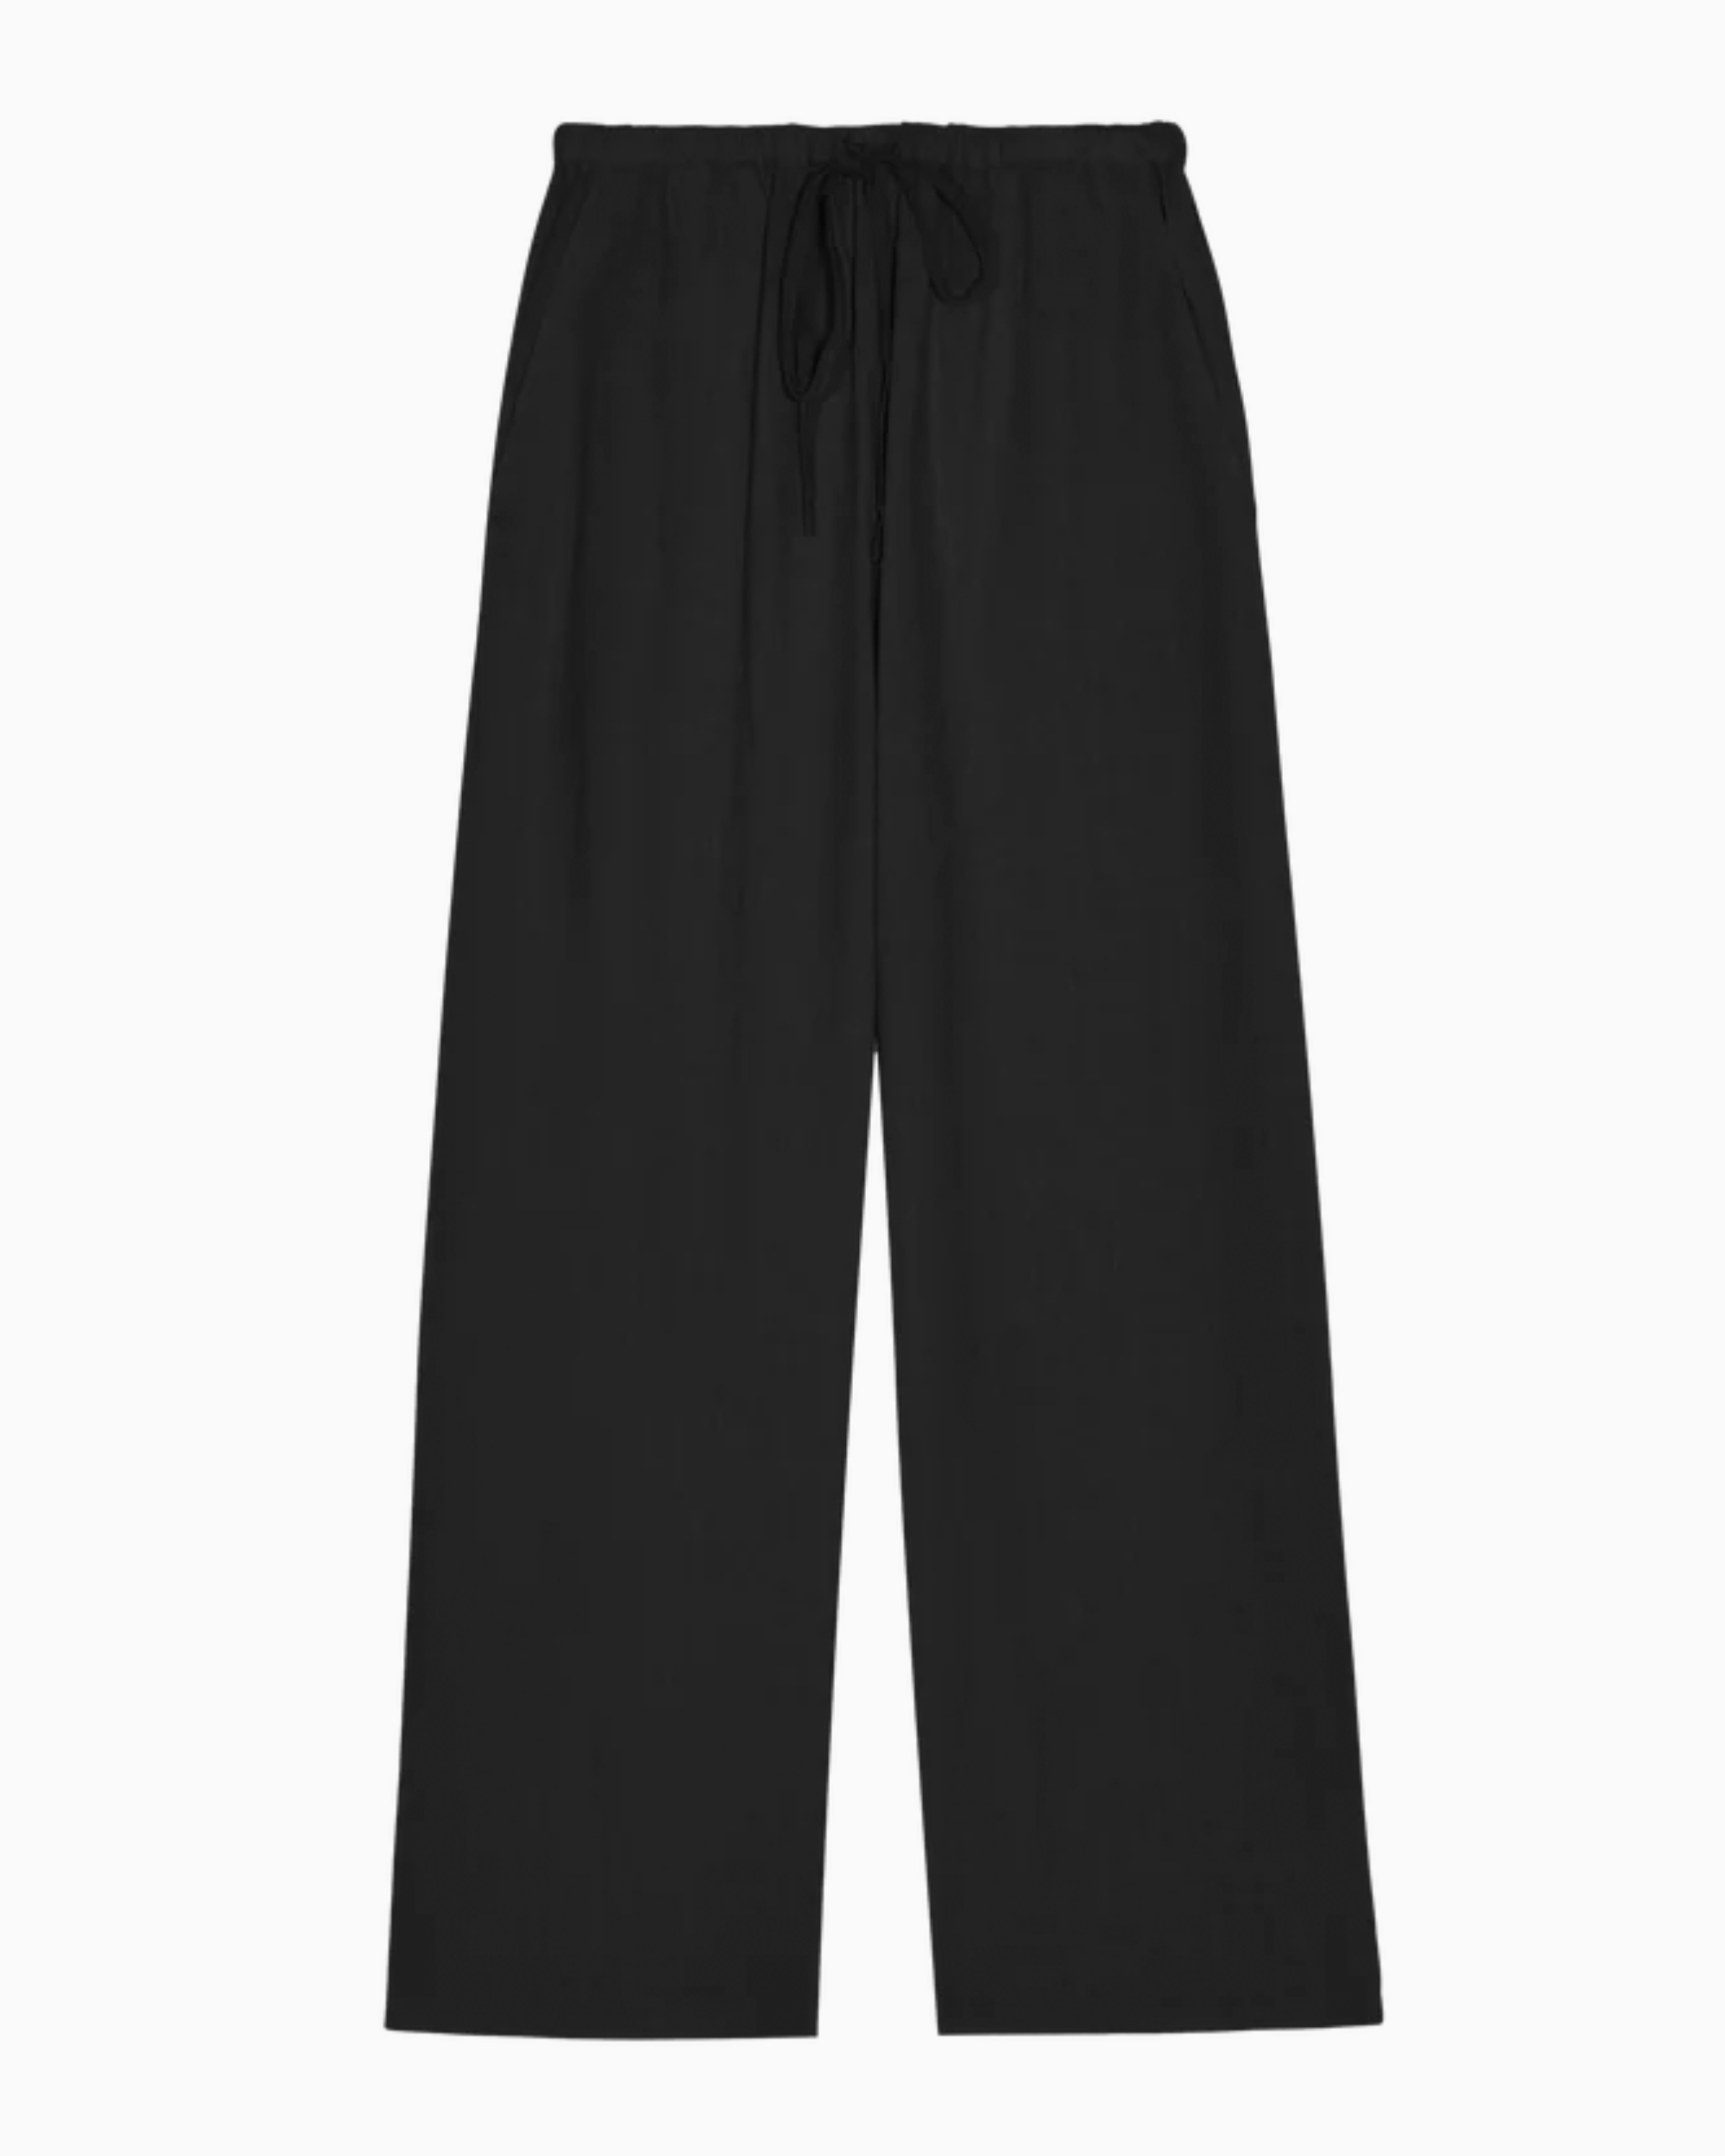 Nation Lucia Tie Waist Pant in Black